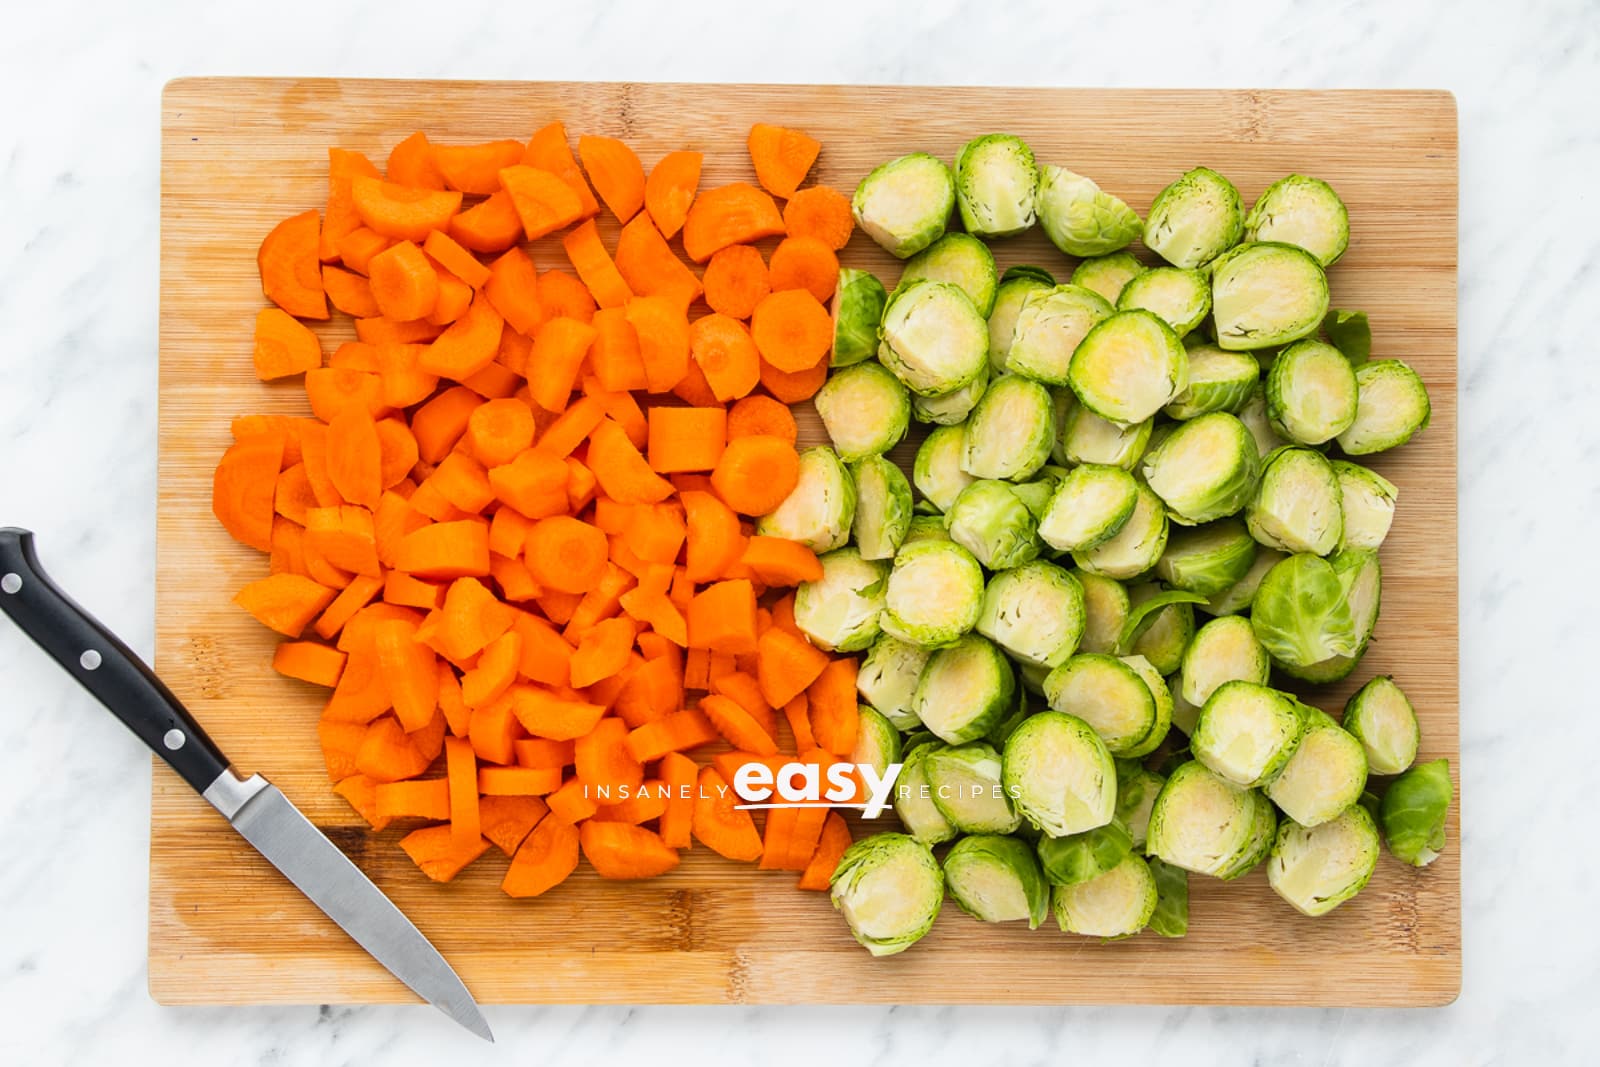 cut carrots and brussels on a wooden cutting board